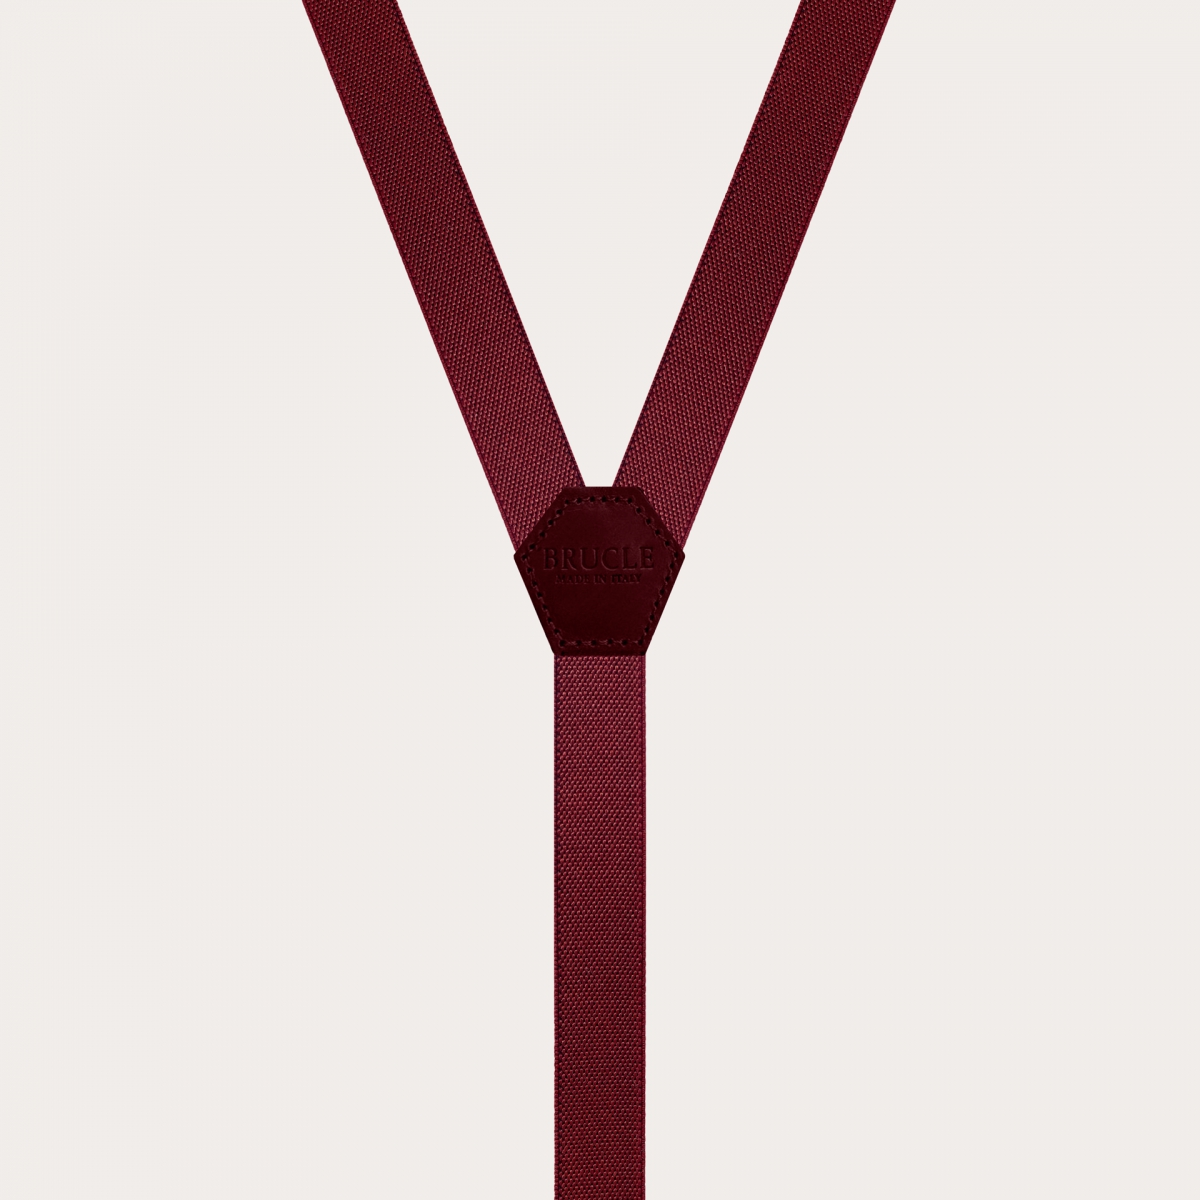 BRUCLE Unisex Y-shaped suspenders for children and teenagers, burgundy